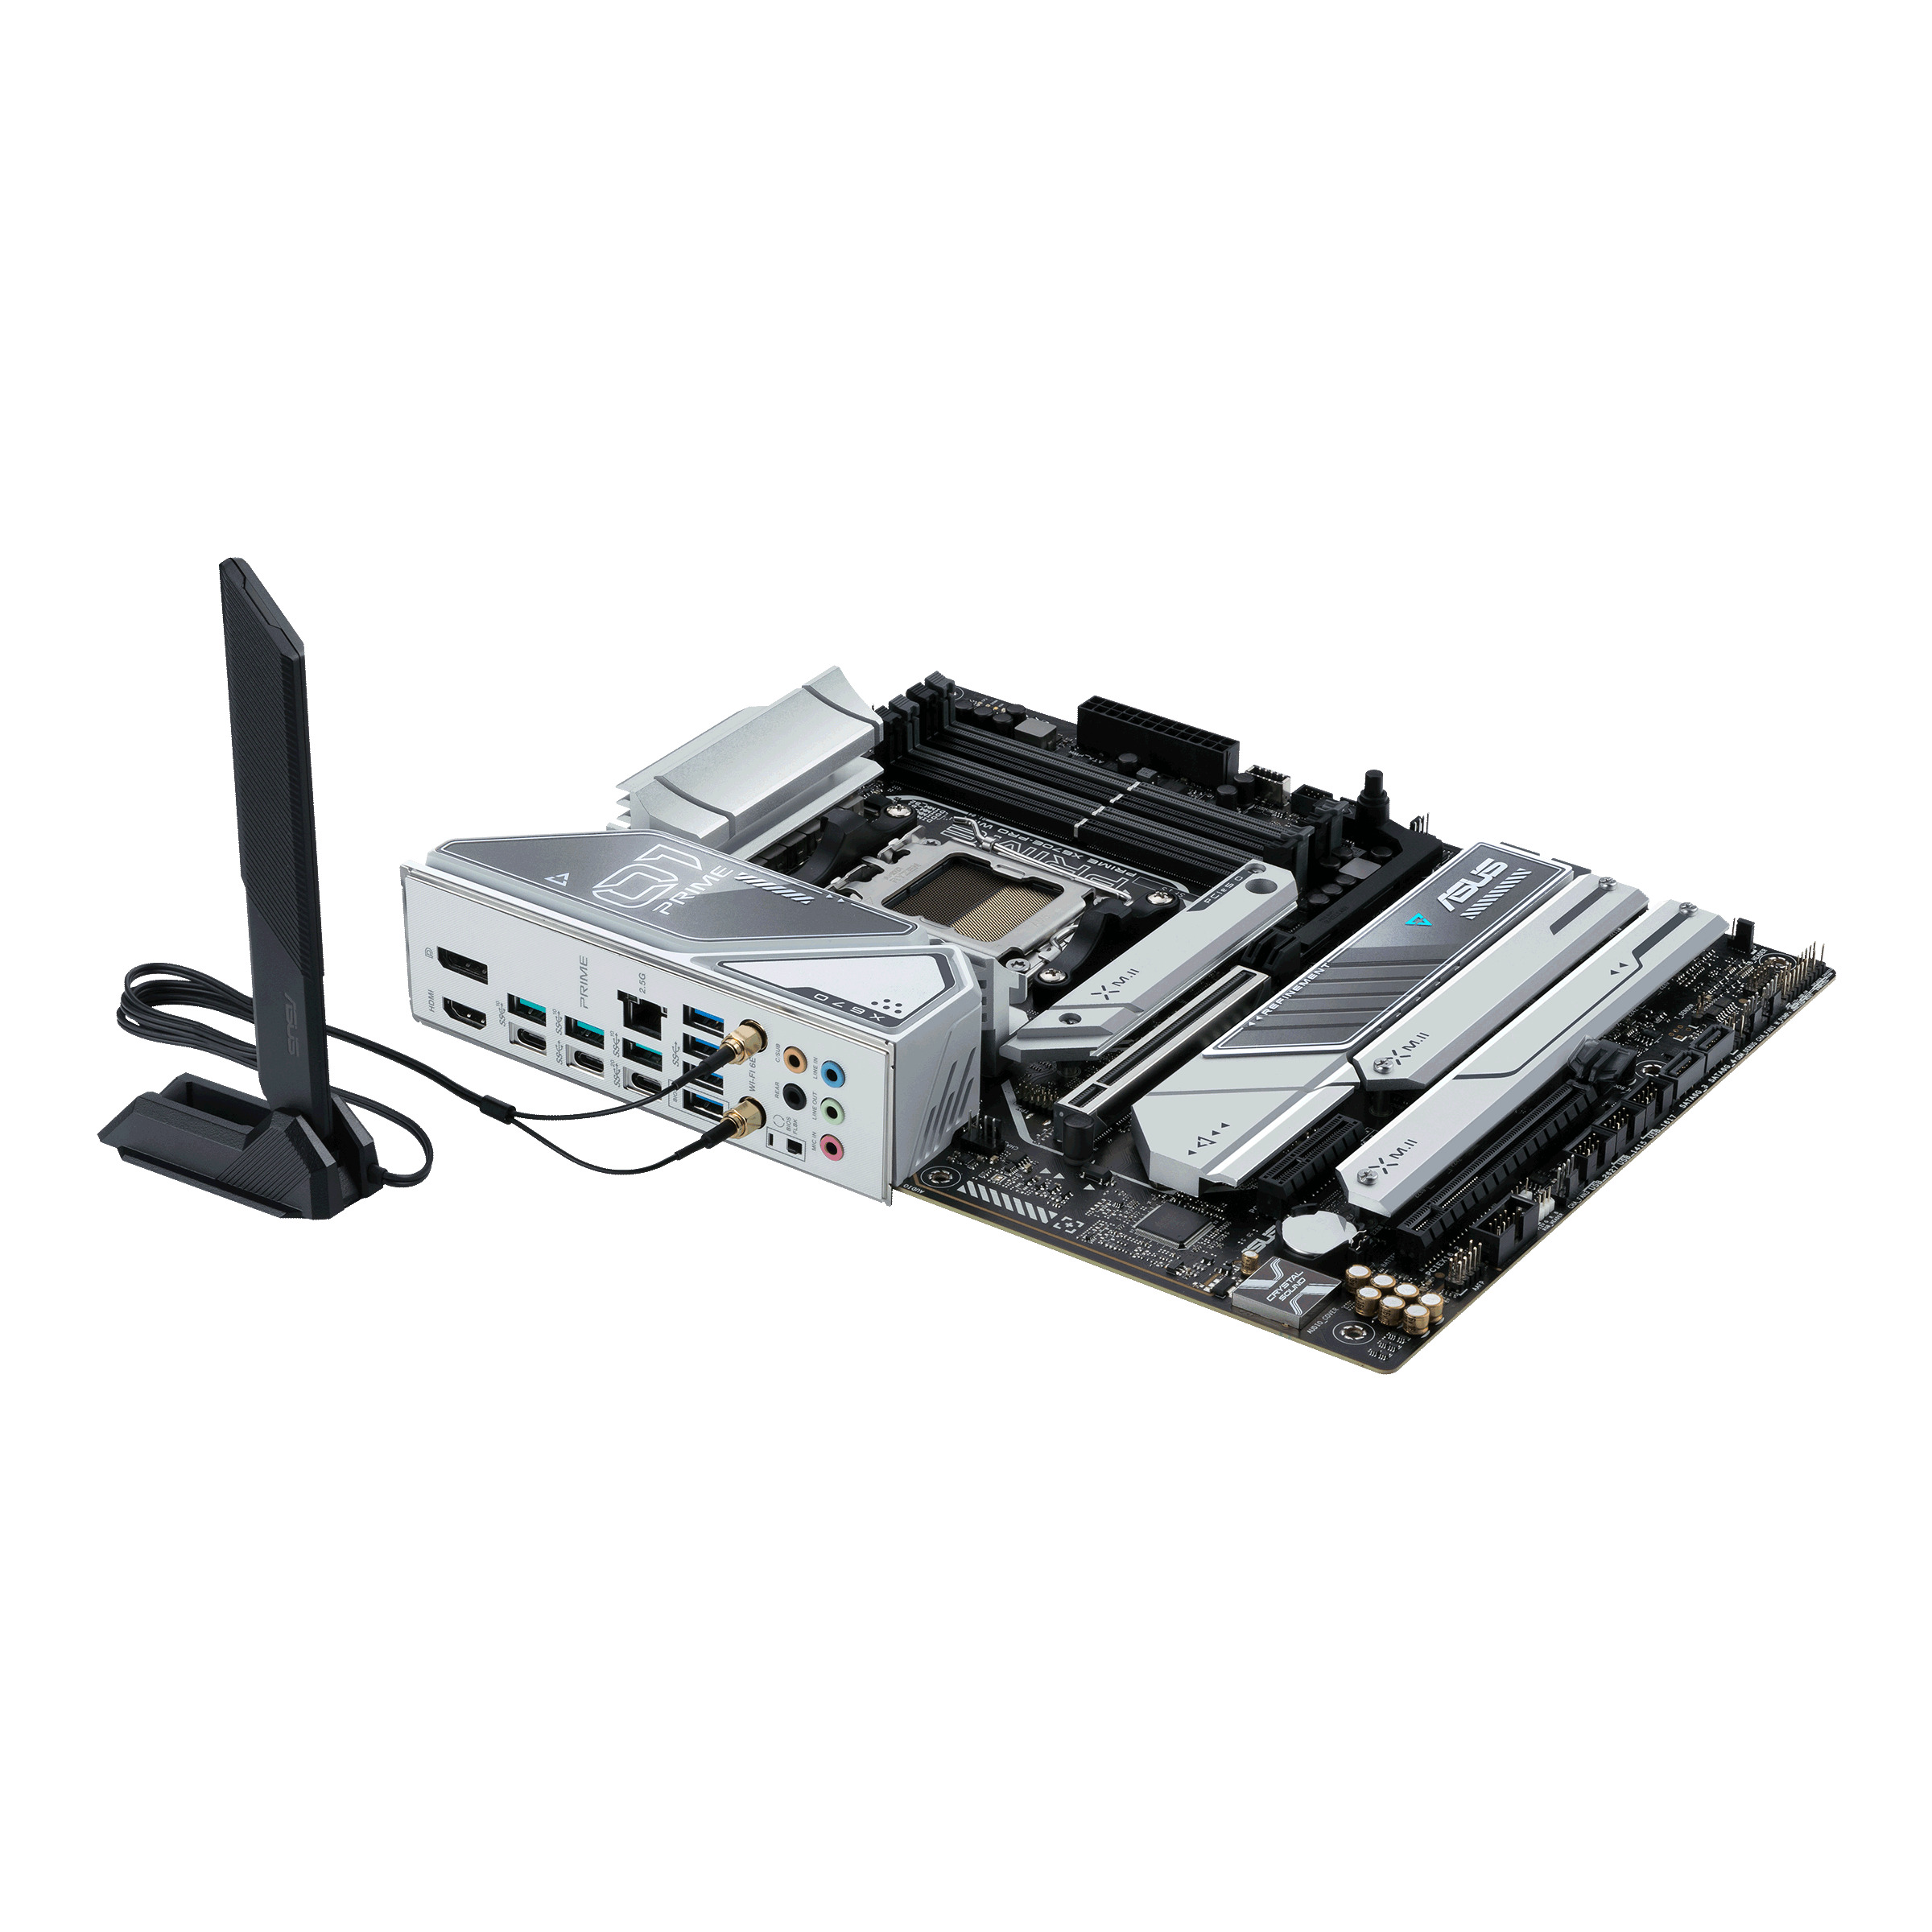 Asus - Motherboard Asus ROG Crosshair X670E Extreme